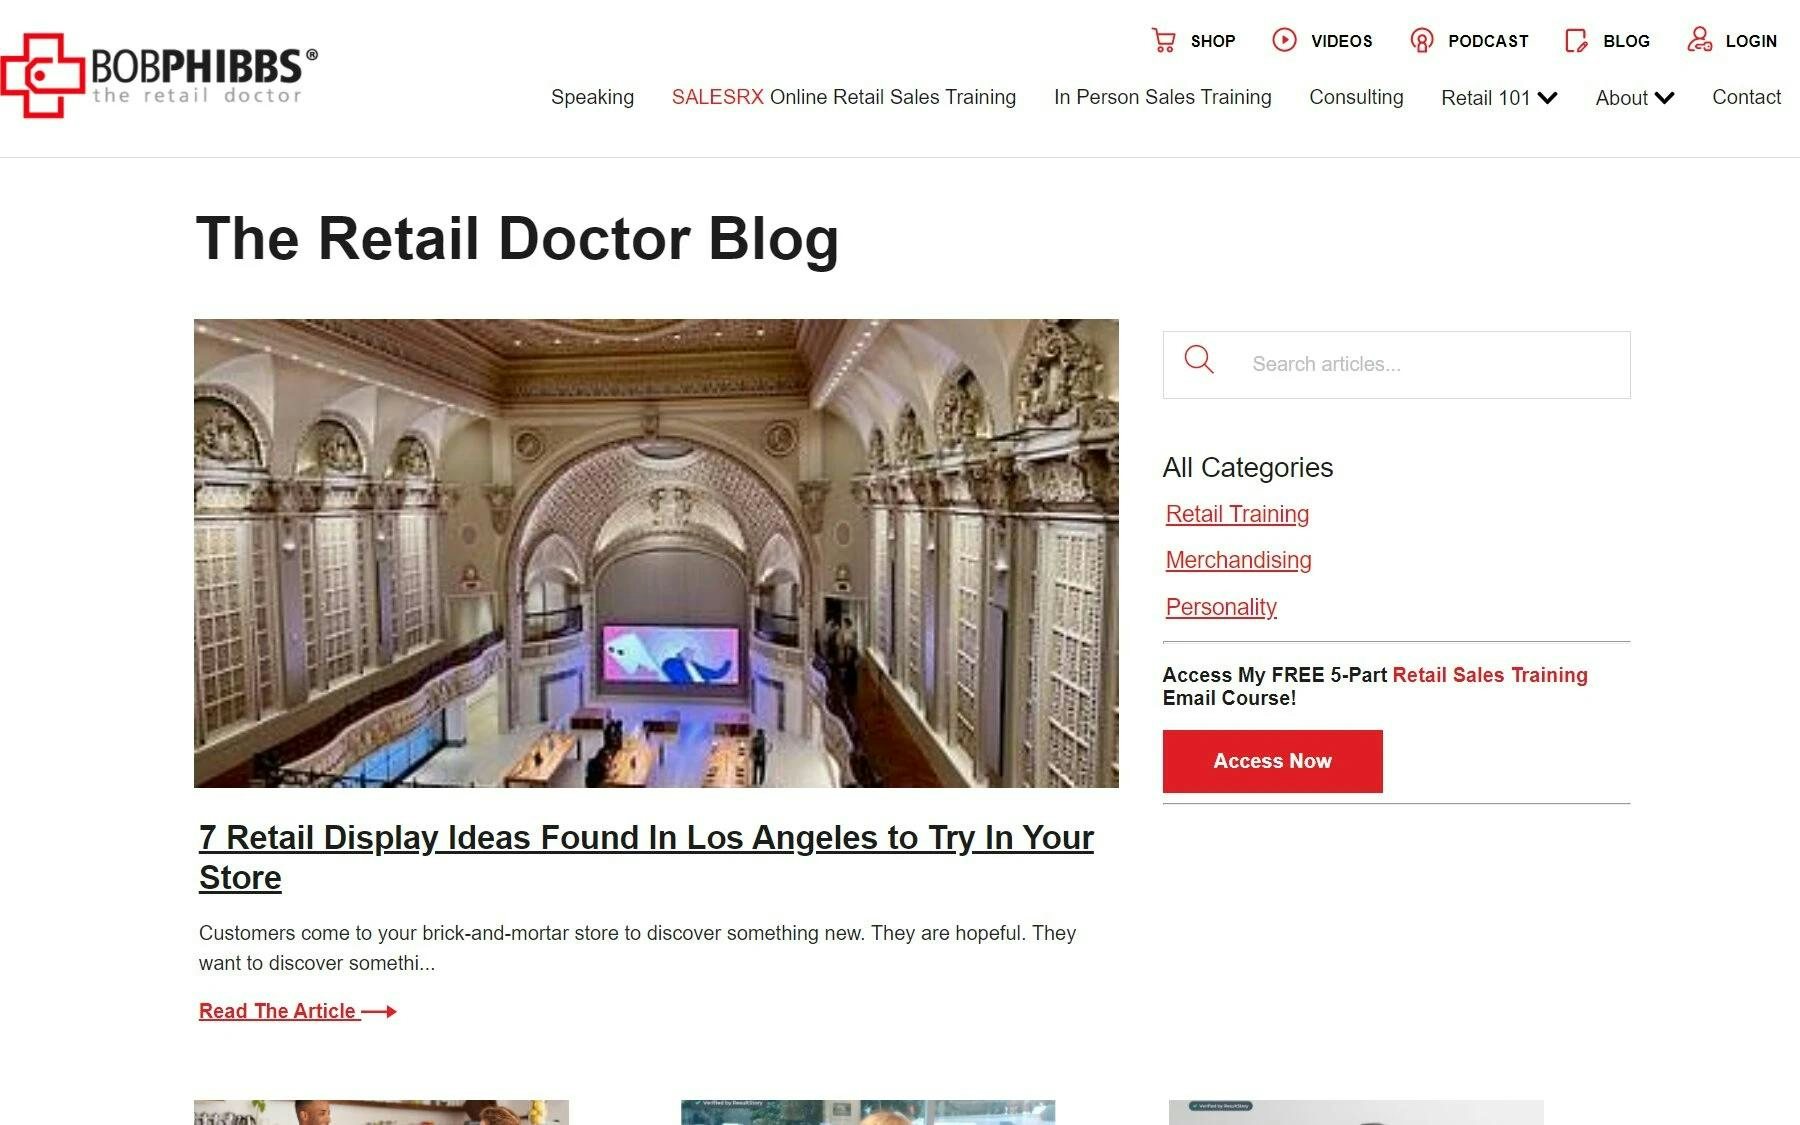 The Retail Doctor